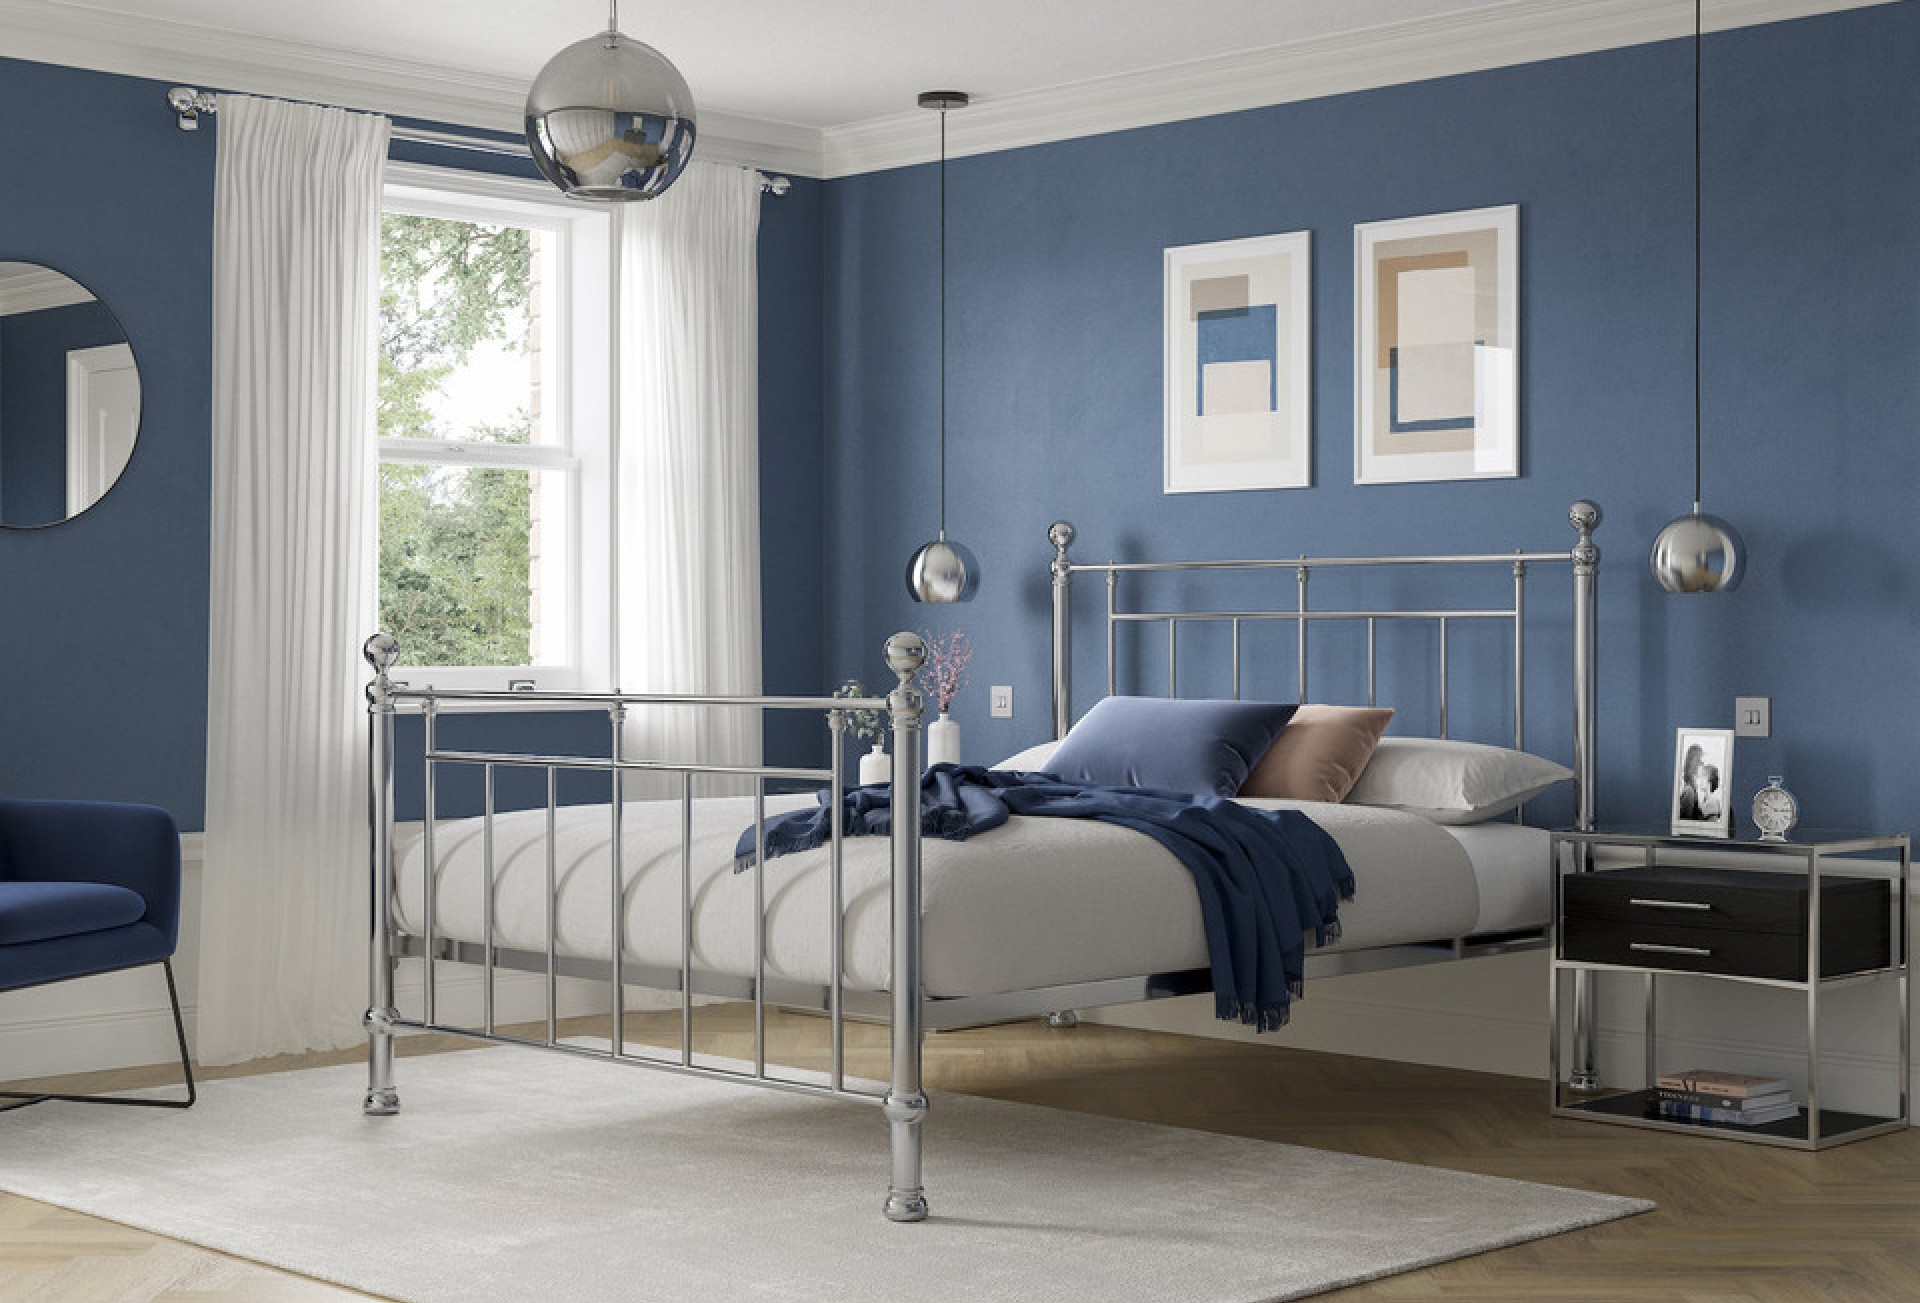 Harvard metal bed frame in chrome set in a contemporary blue bedroom design